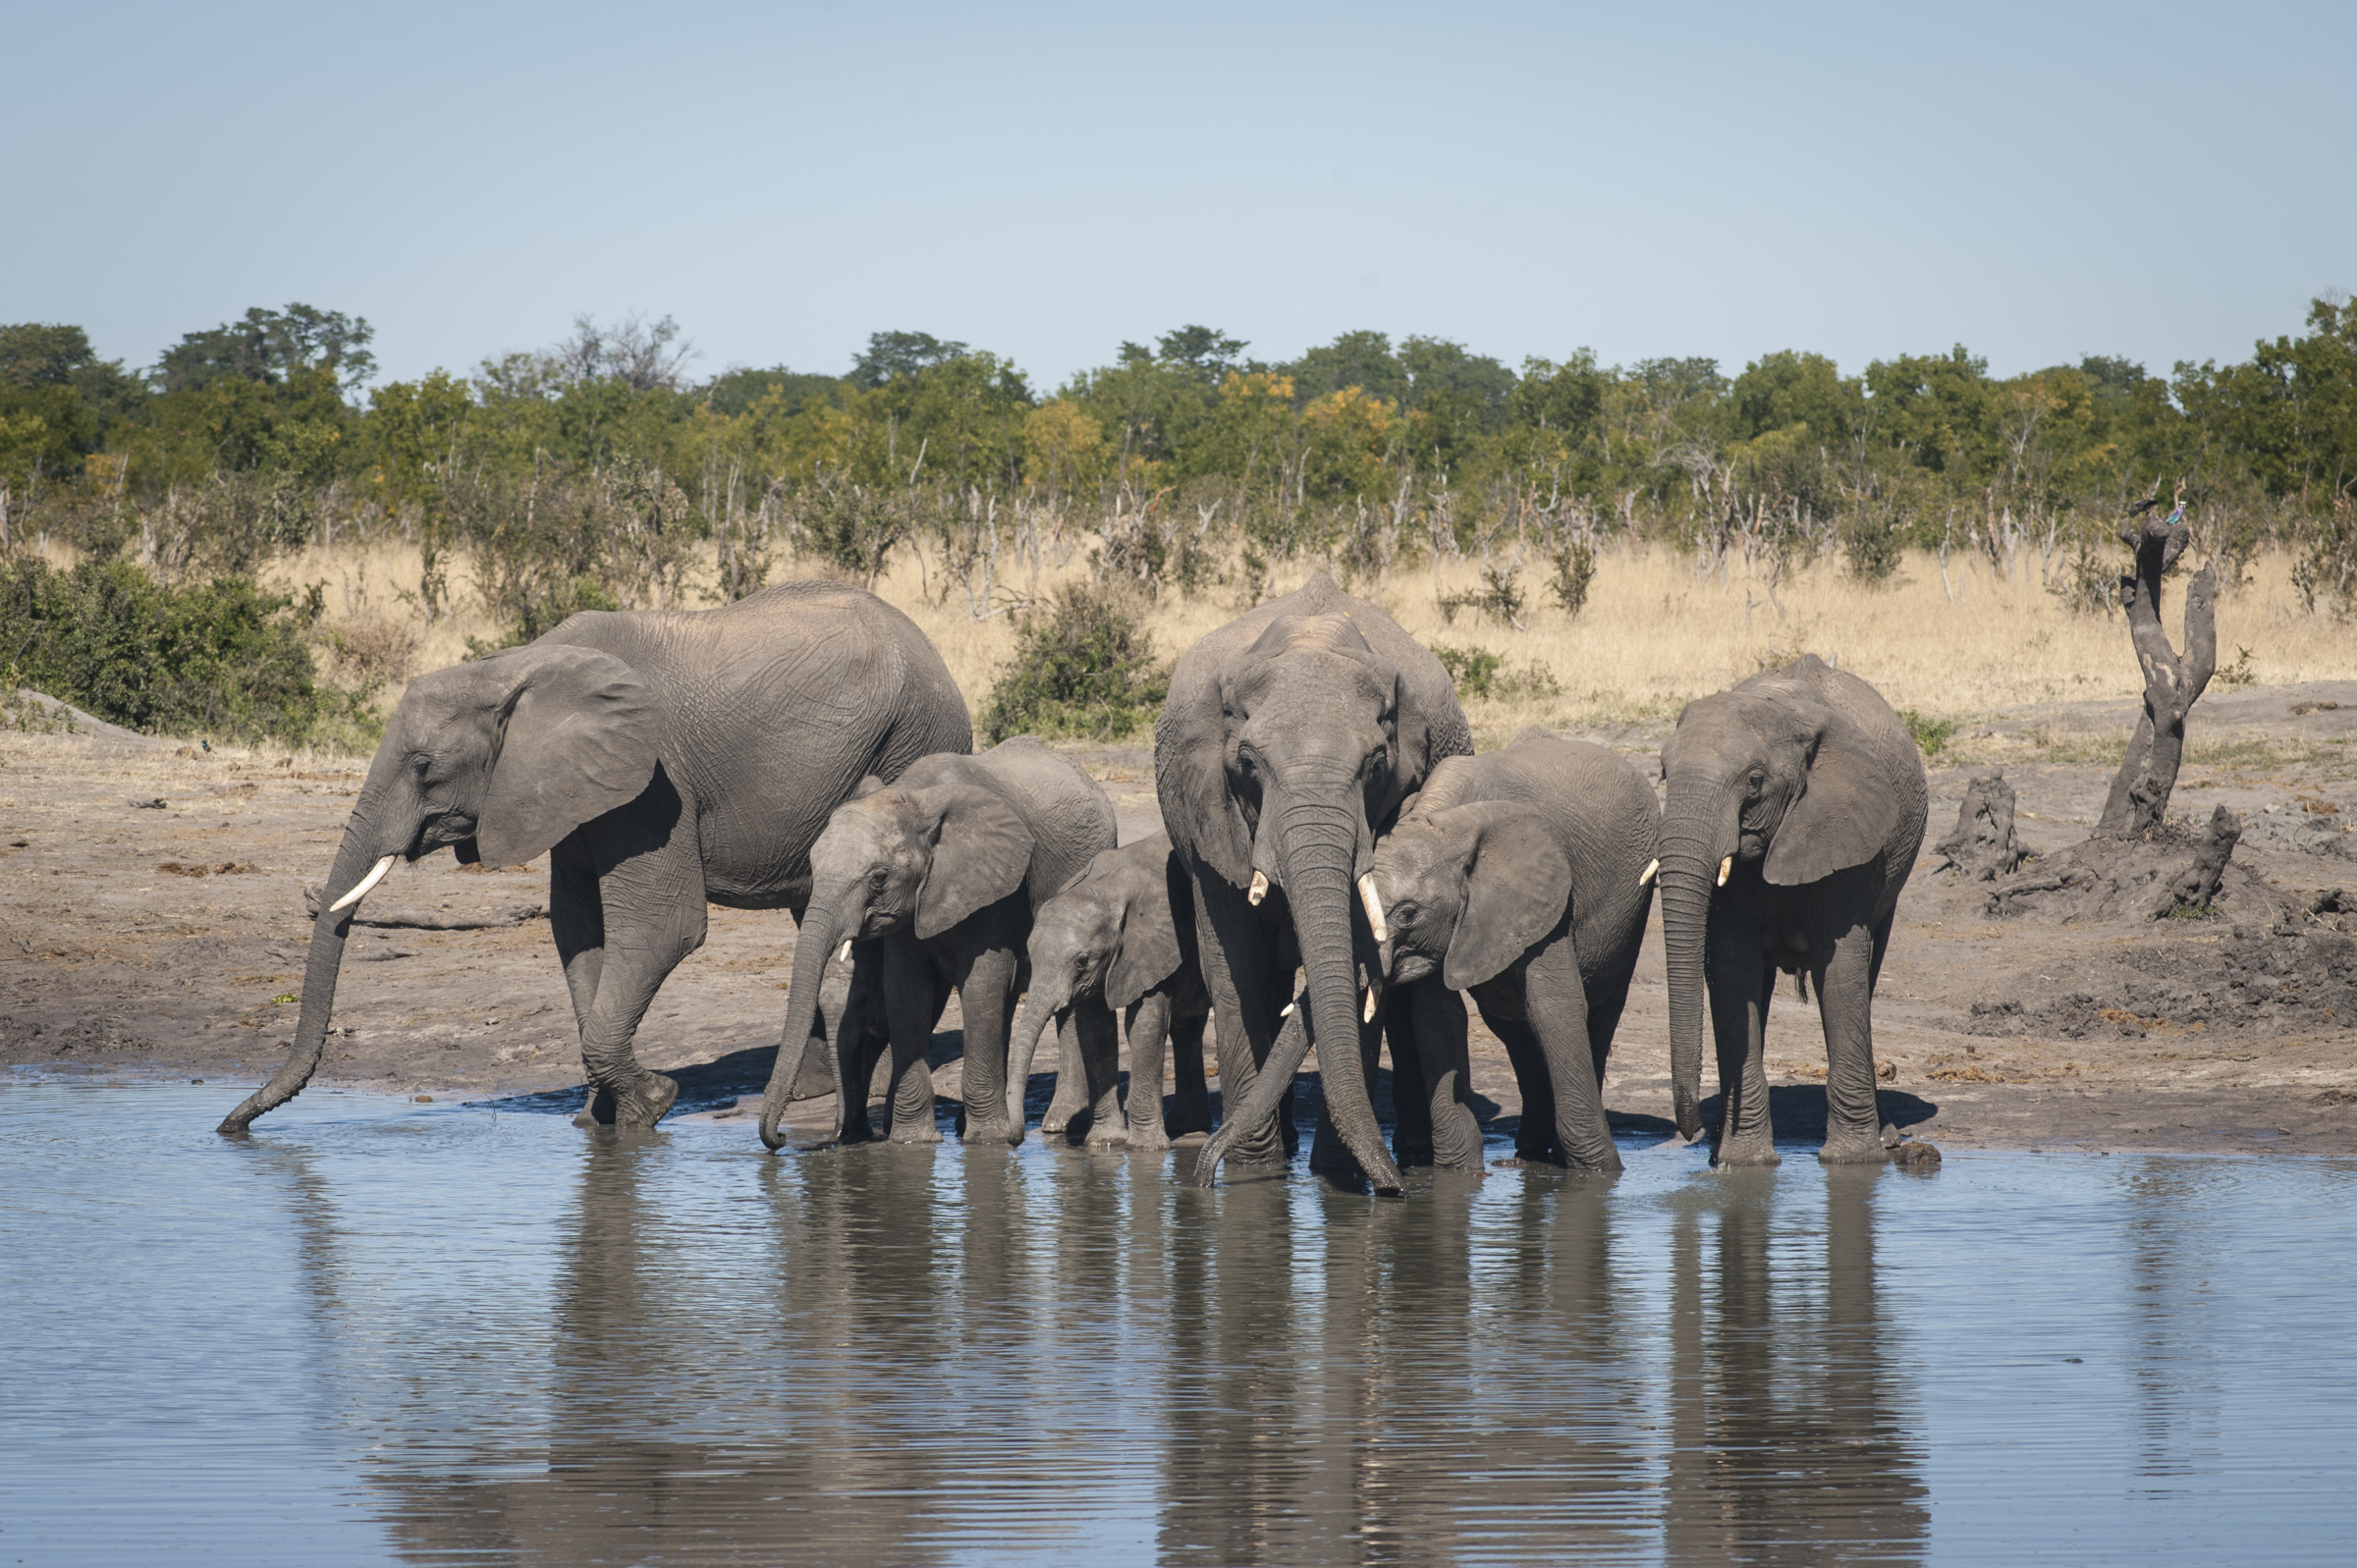 A typical scene at a waterhole, photo by Anton Crone